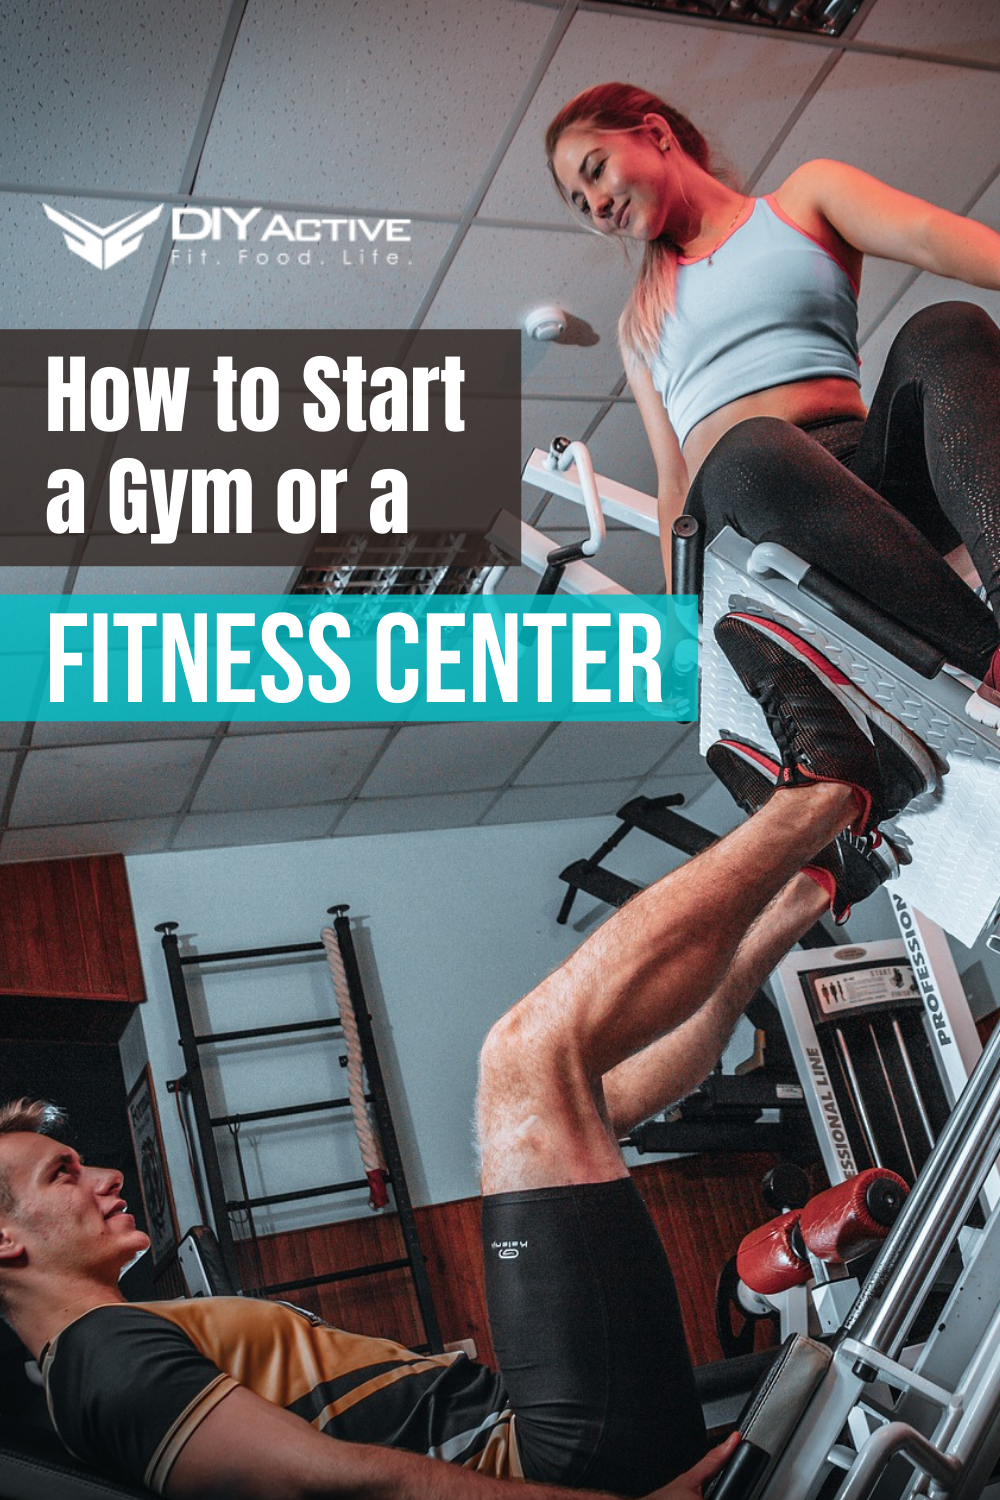 How to Start a Gym or a Fitness Center